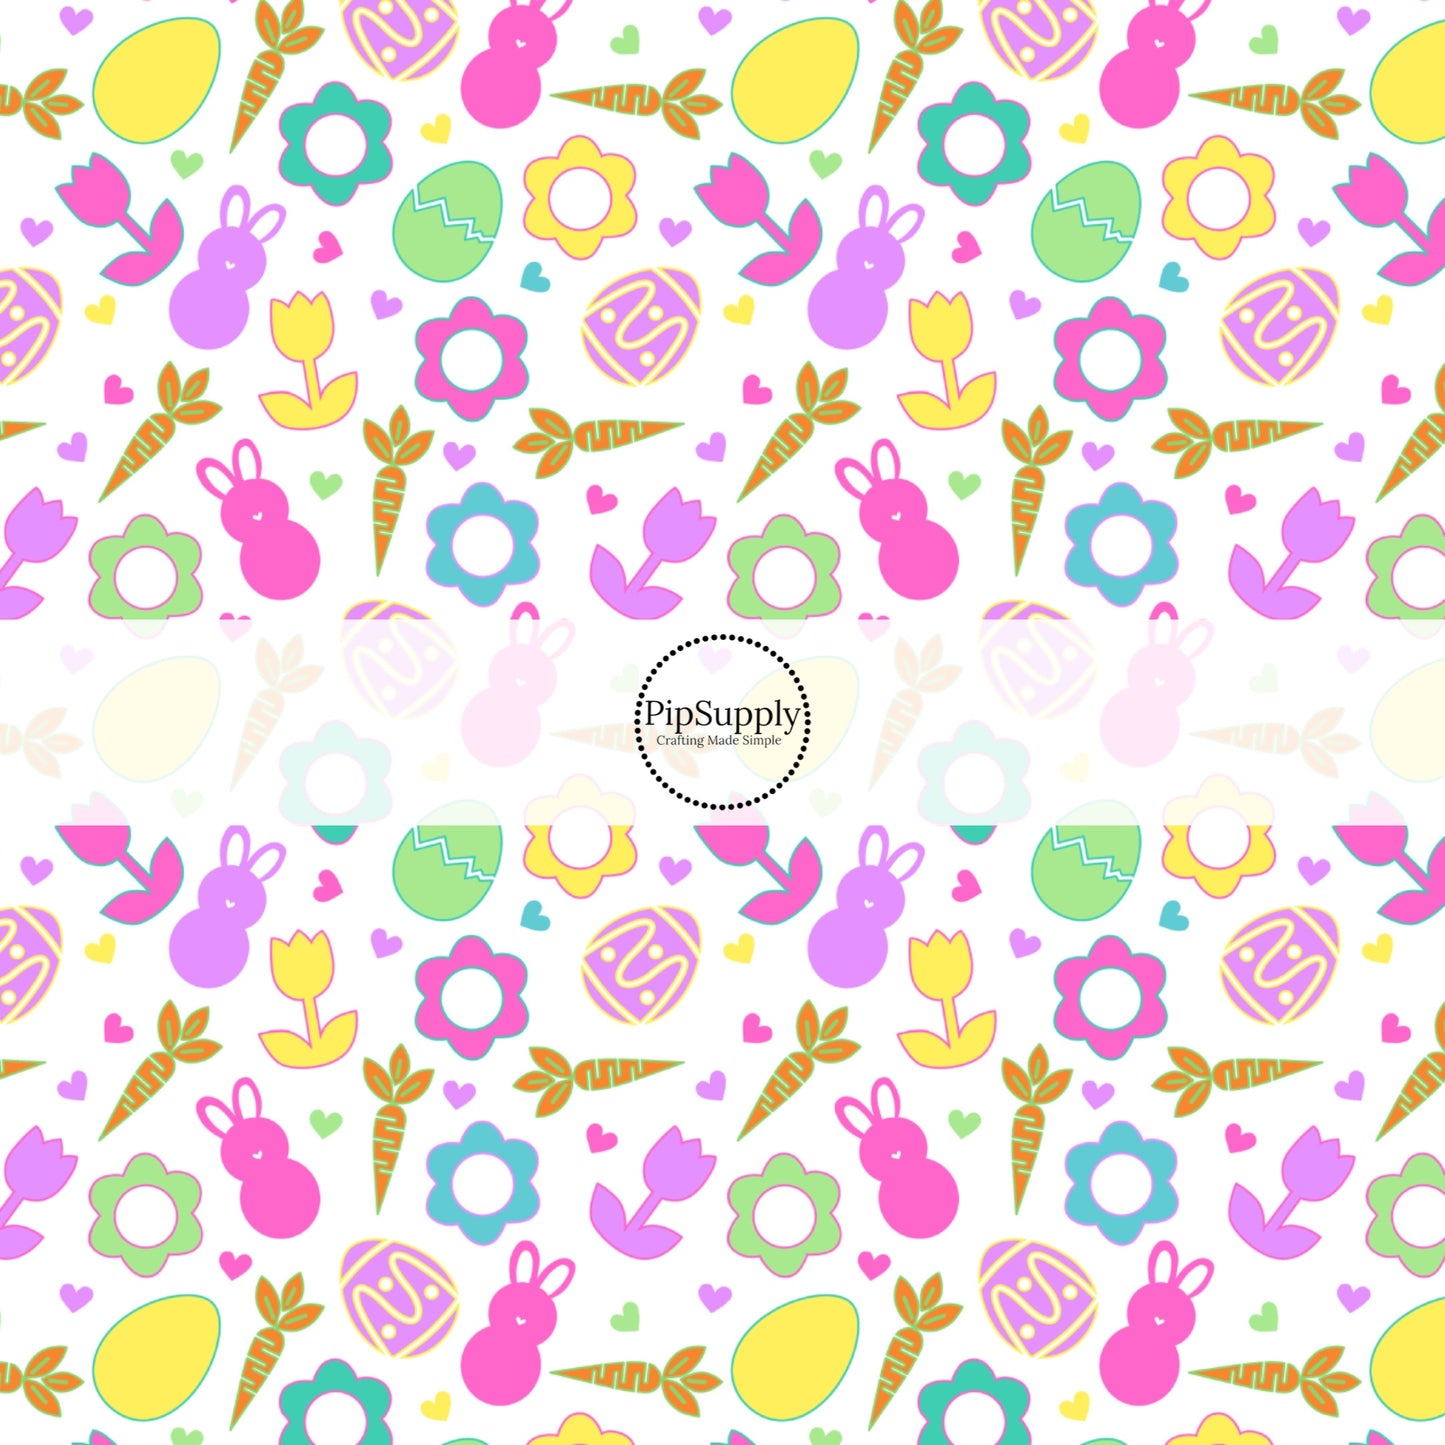 Green and turquoise flowers and pink and yellow tulips, with pink and purple bunnies. Orange carrots and green, yellow, and purple easter eggs on white bow strips